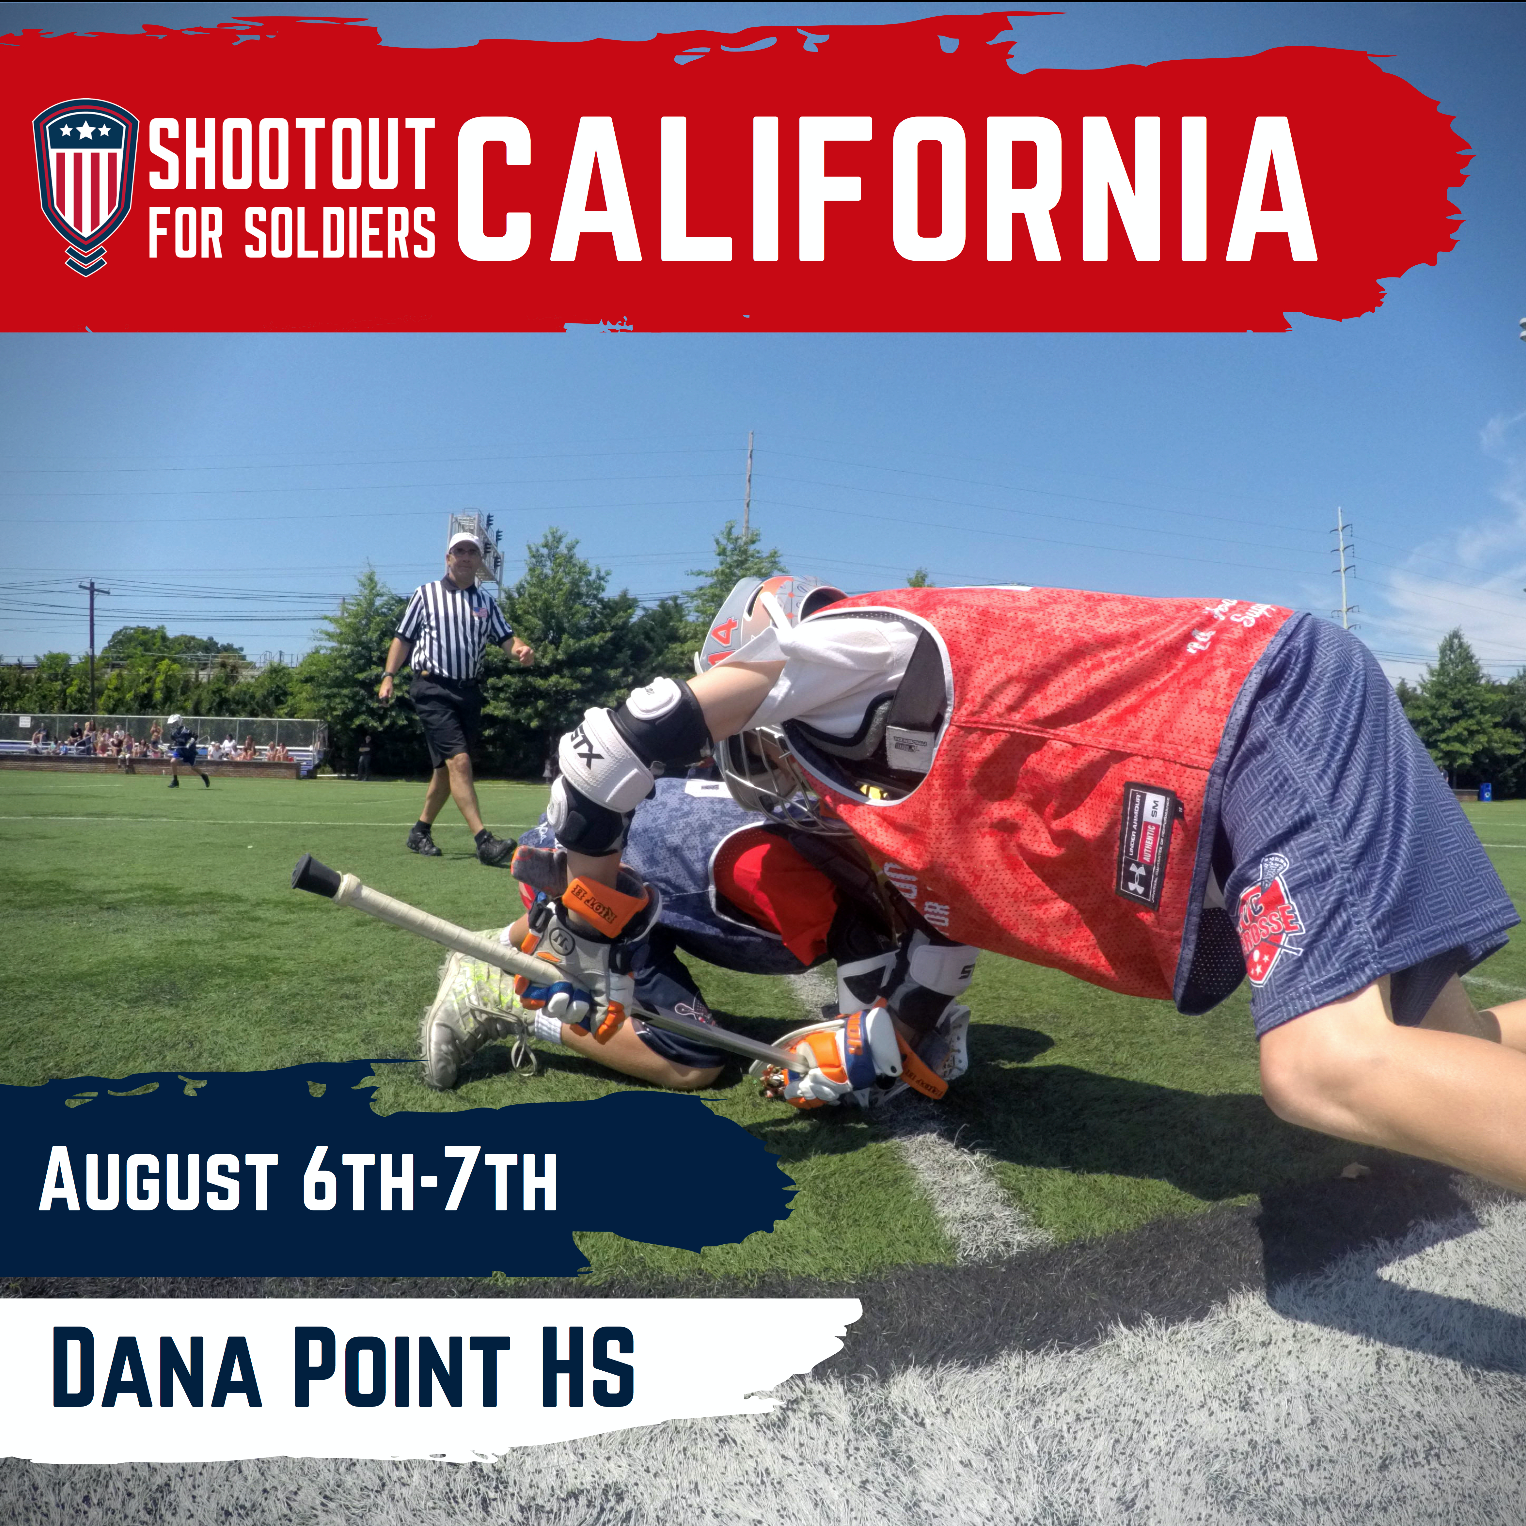 Shootout for Soldiers California: Official Press Release